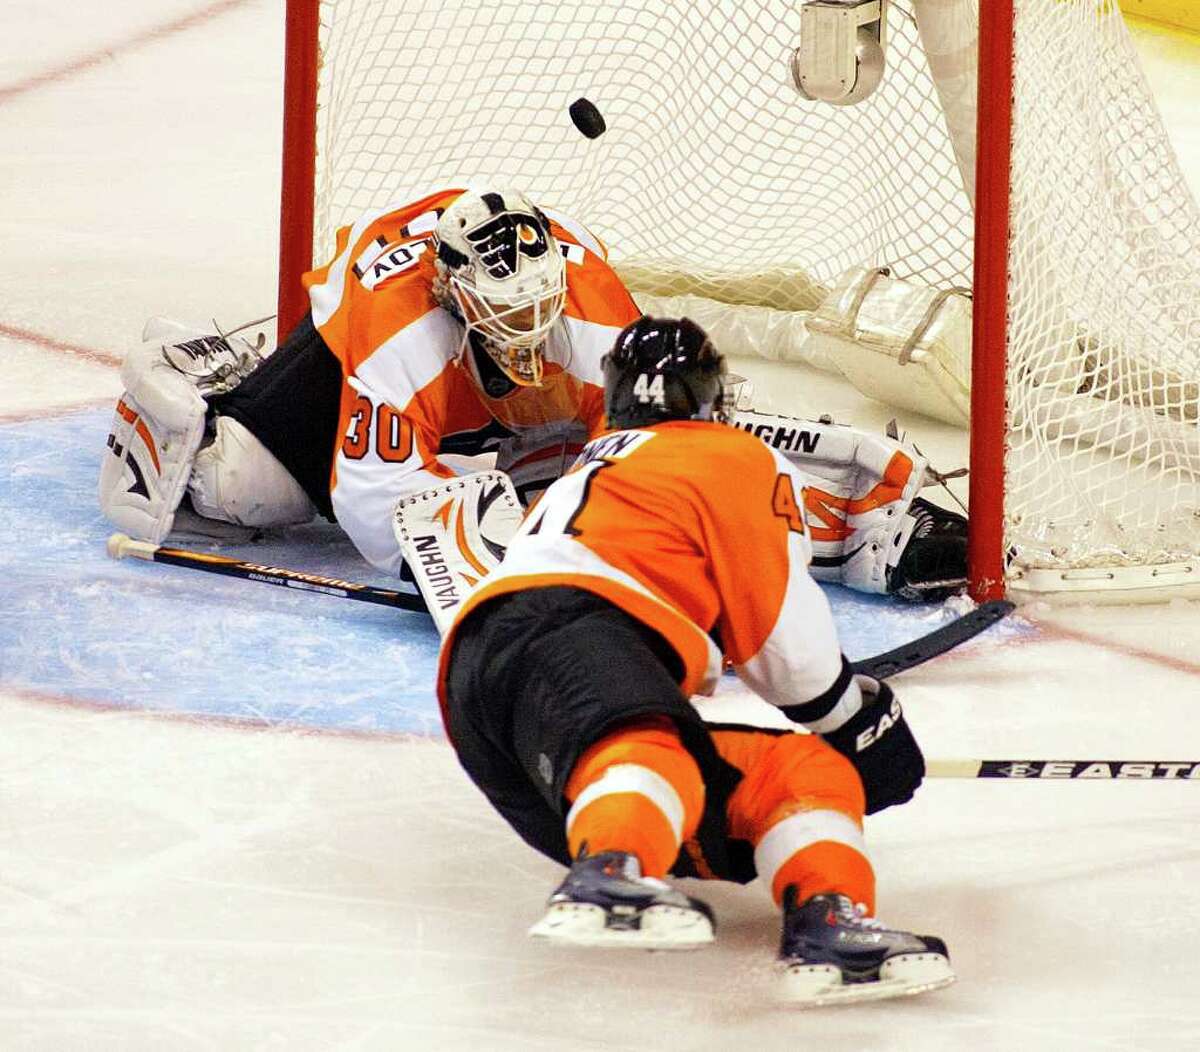 A wrist shot by Vancouver Canucks Daniel Sedin, not pictured, sails past Philadelphia Flyers Kimmo Timonen and goalie Ilya Bryzgalov to tie the score during the third period of an NHL hockey game, Wednesday, Oct. 12, 2011, in Philadelphia. The Flyers won 5-4. (AP Photo/Tom Mihalek)